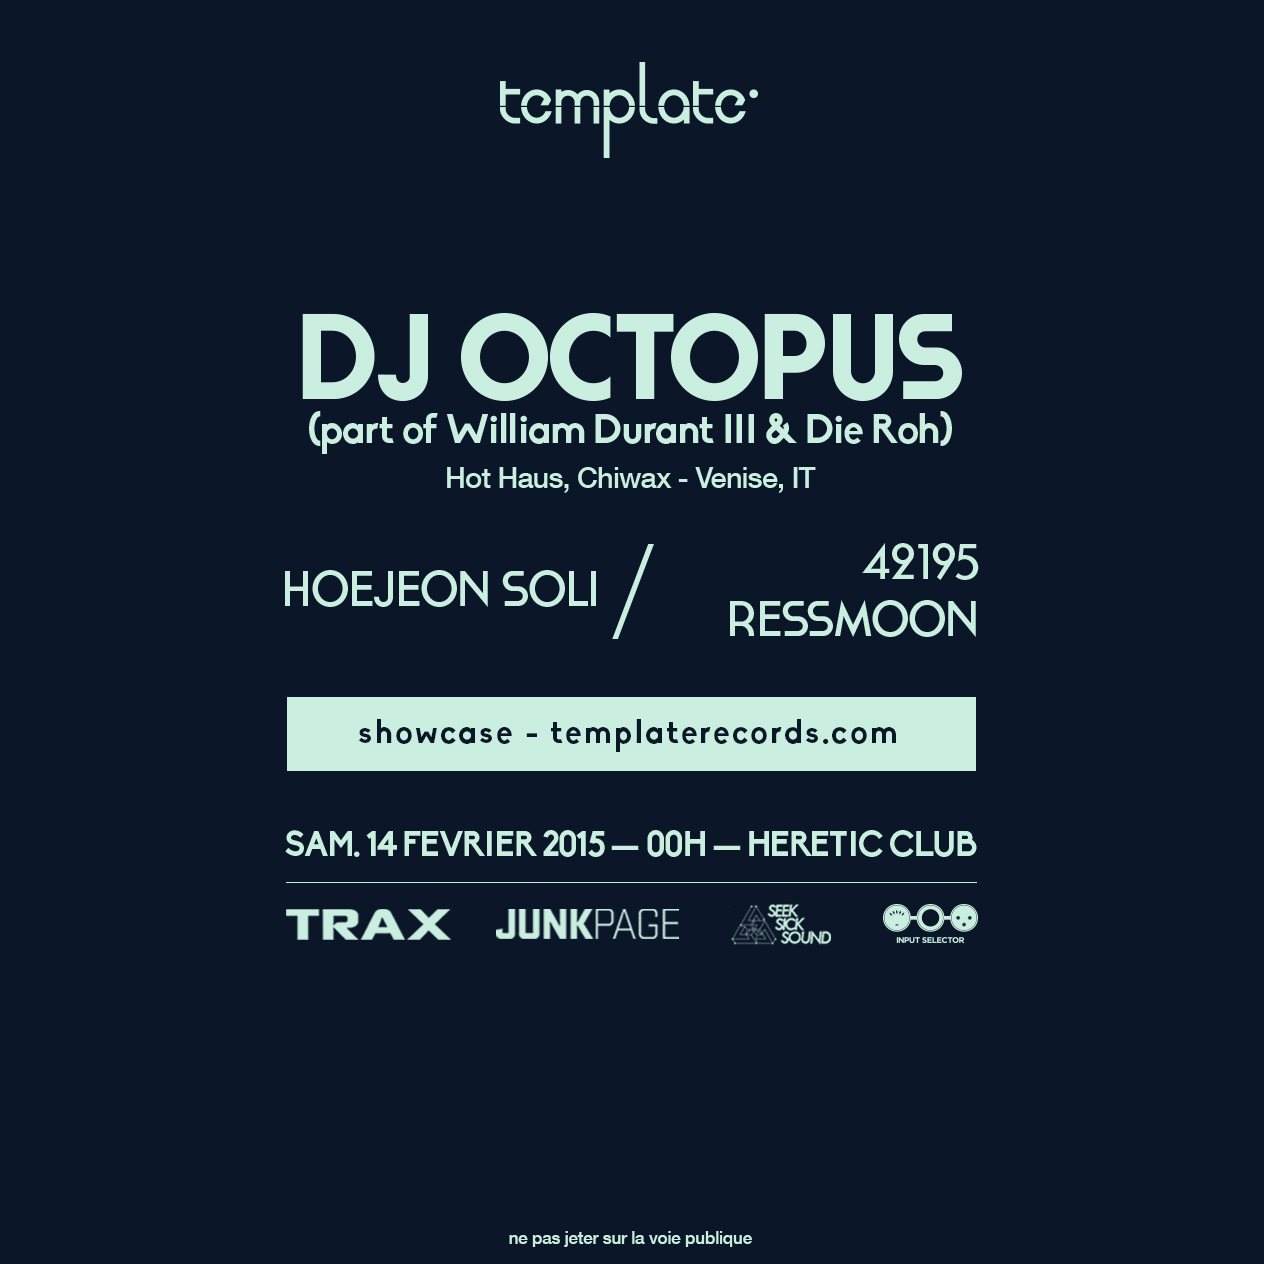 Template Showcase with DJ Octopus - フライヤー裏